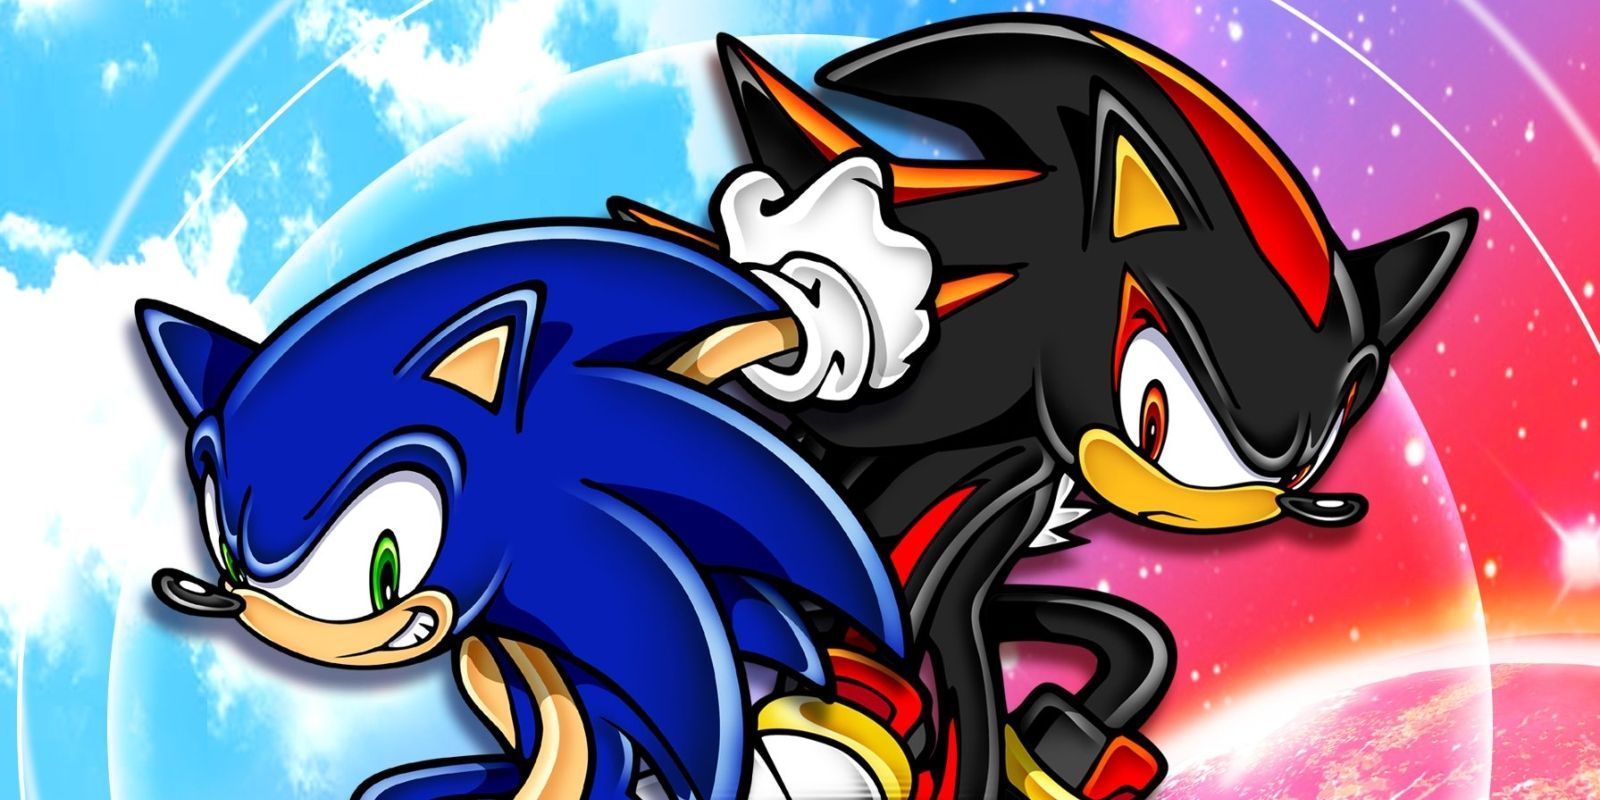 Sonic and Shadow back-to-back in art for Sonic Adventures 2